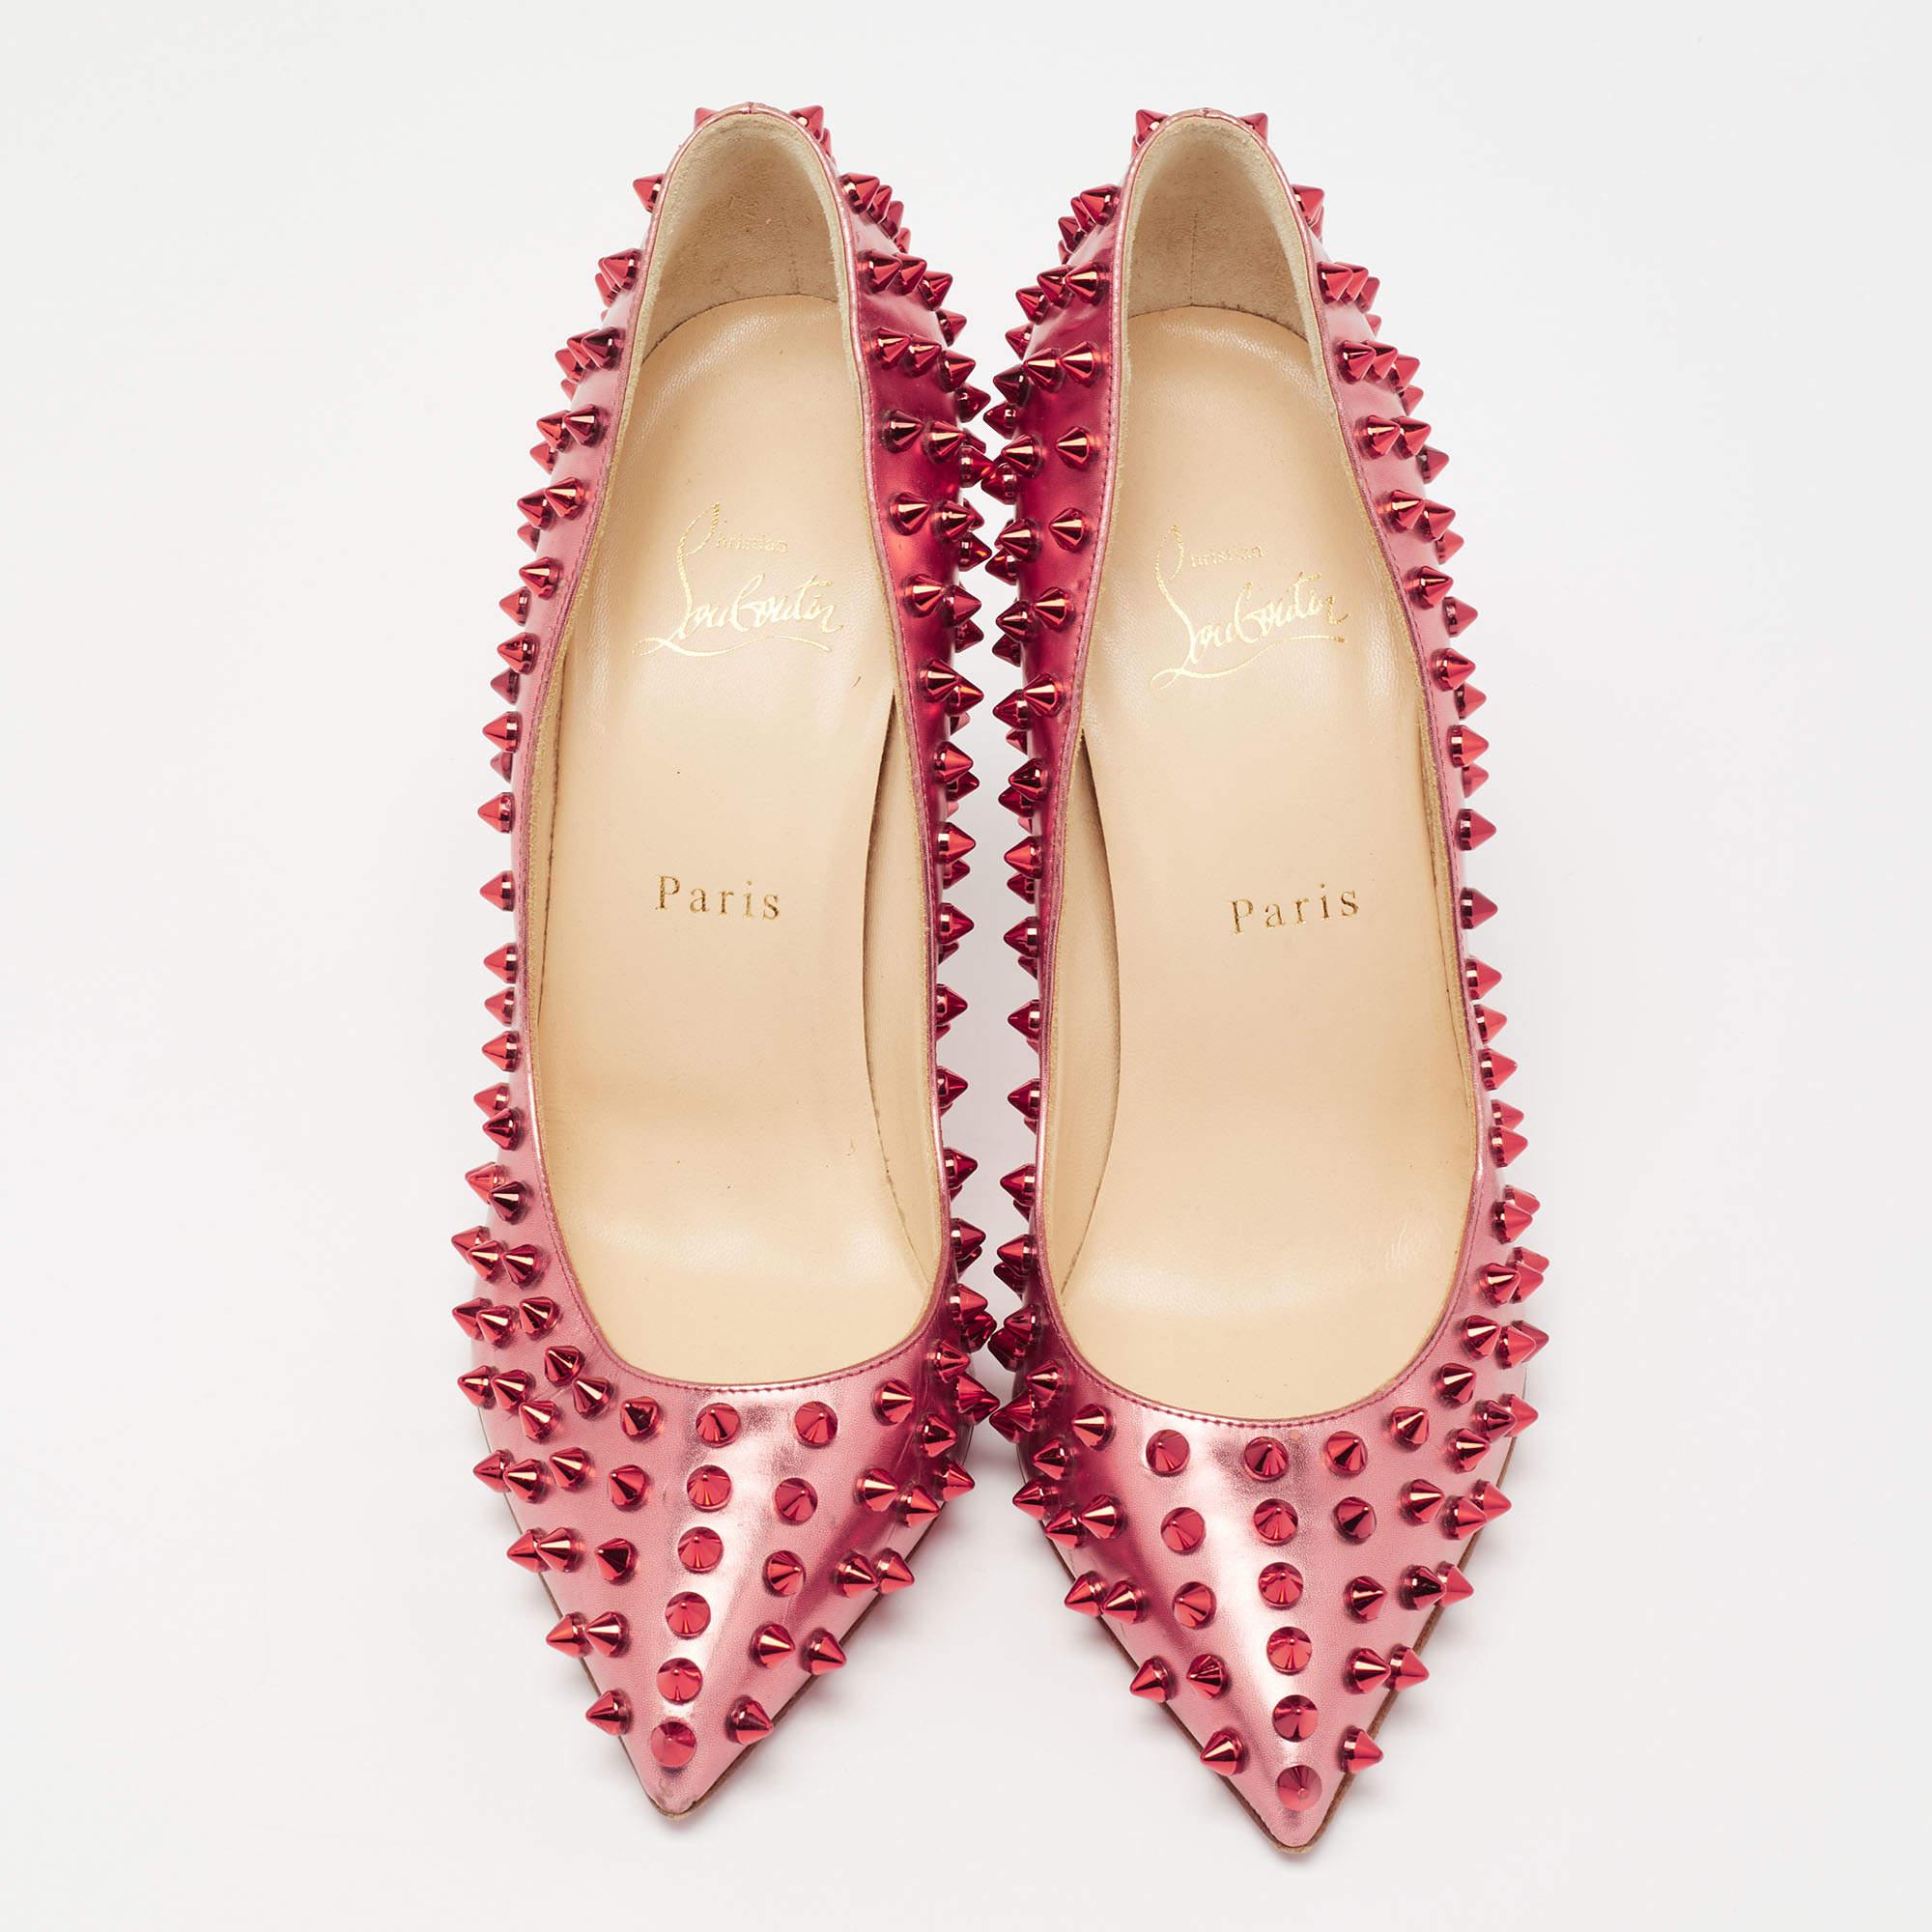 Dazzle everyone with these Louboutins by owning them today. Crafted from metallic leather, these two-tone pumps carry a mesmerizing shape with studded spikes all over, pointed toes, and 11 cm heels. Complete with the signature red soles, this pair